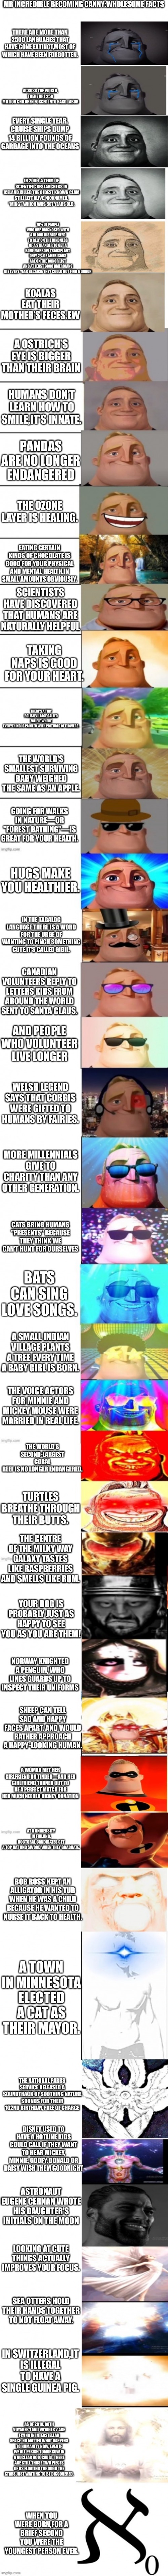 Mr Incredible becoming Canny:Wholesome Facts.(Super Extended) | MR INCREDIBLE BECOMING CANNY:WHOLESOME FACTS; THERE ARE MORE THAN 2500 LANGUAGES THAT HAVE GONE EXTINCT,MOST OF WHICH HAVE BEEN FORGOTTEN. ACROSS THE WORLD, THERE ARE 250 MILLION CHILDREN FORCED INTO HARD LABOR; EVERY SINGLE YEAR, CRUISE SHIPS DUMP 14 BILLION POUNDS OF GARBAGE INTO THE OCEANS; IN 2006, A TEAM OF SCIENTIFIC RESEARCHERS IN ICELAND,KILLED THE OLDEST KNOWN CLAM STILL LEFT ALIVE, NICKNAMED, “MING”, WHICH WAS 507 YEARS OLD. 70% OF PEOPLE WHO ARE DIAGNOSED WITH A BLOOD DISEASE NEED TO RELY ON THE KINDNESS OF A STRANGER TO GET A BONE MARROW TRANSPLANT. ONLY 2% OF AMERICANS ARE ON THE DONOR LIST AND AT LEAST 3000 AMERICANS DIE EVERY YEAR BECAUSE THEY COULD NOT FIND A DONOR; KOALAS EAT THEIR MOTHER’S FECES.EW; A OSTRICH’S EYE IS BIGGER THAN THEIR BRAIN; HUMANS DON’T LEARN HOW TO SMILE,IT’S INNATE. PANDAS ARE NO LONGER ENDANGERED; THE OZONE LAYER IS HEALING. EATING CERTAIN KINDS OF CHOCOLATE IS GOOD FOR YOUR PHYSICAL AND MENTAL HEALTH.IN SMALL AMOUNTS OBVIOUSLY. SCIENTISTS HAVE DISCOVERED THAT HUMANS ARE NATURALLY HELPFUL; TAKING NAPS IS GOOD FOR YOUR HEART. THERE'S A TINY POLISH VILLAGE CALLED ZALIPIE WHERE EVERYTHING IS PAINTED WITH PICTURES OF FLOWERS. THE WORLD'S SMALLEST SURVIVING BABY WEIGHED THE SAME AS AN APPLE. GOING FOR WALKS IN NATURE—OR "FOREST BATHING"—IS GREAT FOR YOUR HEALTH. HUGS MAKE YOU HEALTHIER. IN THE TAGALOG LANGUAGE THERE IS A WORD FOR THE URGE OF WANTING TO PINCH SOMETHING CUTE.IT’S CALLED GIGIL. CANADIAN VOLUNTEERS REPLY TO LETTERS KIDS FROM AROUND THE WORLD SENT TO SANTA CLAUS. AND PEOPLE WHO VOLUNTEER LIVE LONGER; WELSH LEGEND SAYS THAT CORGIS WERE GIFTED TO HUMANS BY FAIRIES. MORE MILLENNIALS GIVE TO CHARITY THAN ANY OTHER GENERATION. CATS BRING HUMANS "PRESENTS" BECAUSE THEY THINK WE CAN'T HUNT FOR OURSELVES; BATS CAN SING LOVE SONGS. A SMALL INDIAN VILLAGE PLANTS A TREE EVERY TIME A BABY GIRL IS BORN. THE VOICE ACTORS FOR MINNIE AND MICKEY MOUSE WERE MARRIED IN REAL LIFE. THE WORLD'S SECOND-LARGEST CORAL REEF IS NO LONGER ENDANGERED. TURTLES BREATHE THROUGH THEIR BUTTS. THE CENTRE OF THE MILKY WAY GALAXY TASTES LIKE RASPBERRIES AND SMELLS LIKE RUM. YOUR DOG IS PROBABLY JUST AS HAPPY TO SEE YOU AS YOU ARE THEM! NORWAY KNIGHTED A PENGUIN, WHO LINES GUARDS UP TO INSPECT THEIR UNIFORMS; SHEEP CAN TELL SAD AND HAPPY FACES APART, AND WOULD RATHER APPROACH A HAPPY-LOOKING HUMAN. A WOMAN MET HER GIRLFRIEND ON TINDER—AND HER GIRLFRIEND TURNED OUT TO BE A PERFECT MATCH FOR HER MUCH NEEDED KIDNEY DONATION; AT A UNIVERSITY IN FINLAND, DOCTORAL CANDIDATES GET A TOP HAT AND SWORD WHEN THEY GRADUATE. BOB ROSS KEPT AN ALLIGATOR IN HIS TUB WHEN HE WAS A CHILD BECAUSE HE WANTED TO NURSE IT BACK TO HEALTH. A TOWN IN MINNESOTA ELECTED A CAT AS THEIR MAYOR. THE NATIONAL PARKS SERVICE RELEASED A SOUNDTRACK OF SOOTHING NATURE SOUNDS FOR THEIR 102ND BIRTHDAY, FREE OF CHARGE; DISNEY USED TO HAVE A HOTLINE KIDS COULD CALL IF THEY WANT TO HEAR MICKEY, MINNIE, GOOFY, DONALD OR DAISY WISH THEM GOODNIGHT; ASTRONAUT EUGENE CERNAN WROTE HIS DAUGHTER'S INITIALS ON THE MOON; LOOKING AT CUTE THINGS ACTUALLY IMPROVES YOUR FOCUS. SEA OTTERS HOLD THEIR HANDS TOGETHER TO NOT FLOAT AWAY. IN SWITZERLAND,IT IS ILLEGAL TO HAVE A SINGLE GUINEA PIG. AS OF 2018, BOTH VOYAGER 1 AND VOYAGER 2 ARE FLYING IN INTERSTELLAR SPACE. NO MATTER WHAT HAPPENS TO HUMANITY NOW, EVEN IF WE ALL PERISH TOMORROW IN A NUCLEAR HOLOCAUST, THERE ARE STILL THOSE TWO PIECES OF US FLOATING THROUGH THE STARS JUST WAITING TO BE DISCOVERED. WHEN YOU WERE BORN,FOR A BRIEF SECOND YOU WERE THE YOUNGEST PERSON EVER. | image tagged in mr incredible becoming canny sapphire-extended | made w/ Imgflip meme maker